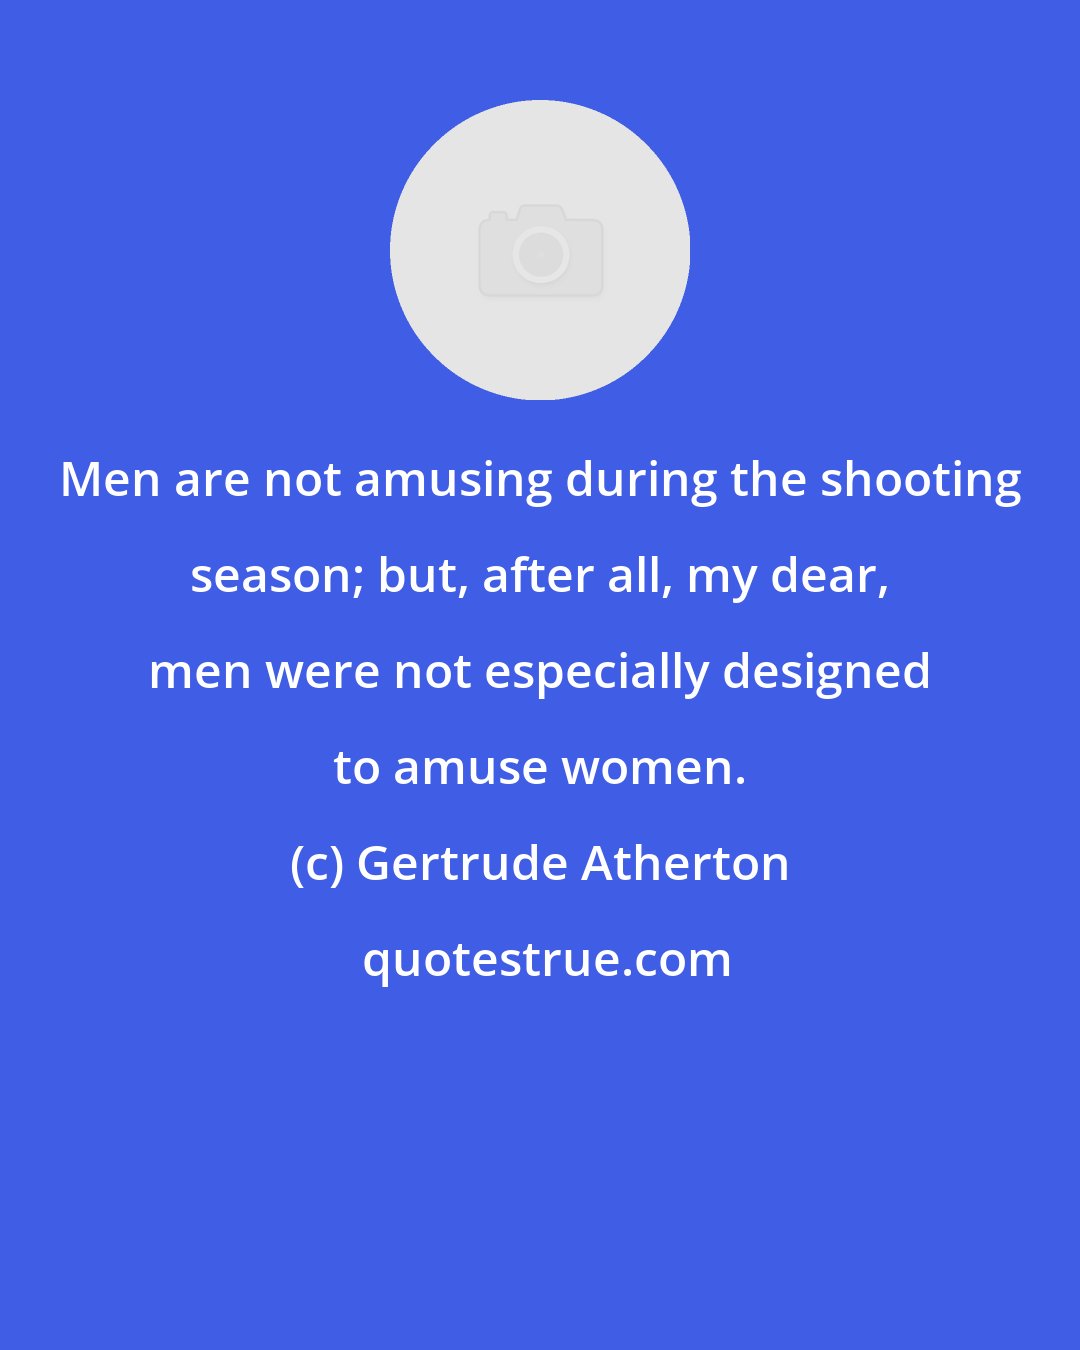 Gertrude Atherton: Men are not amusing during the shooting season; but, after all, my dear, men were not especially designed to amuse women.